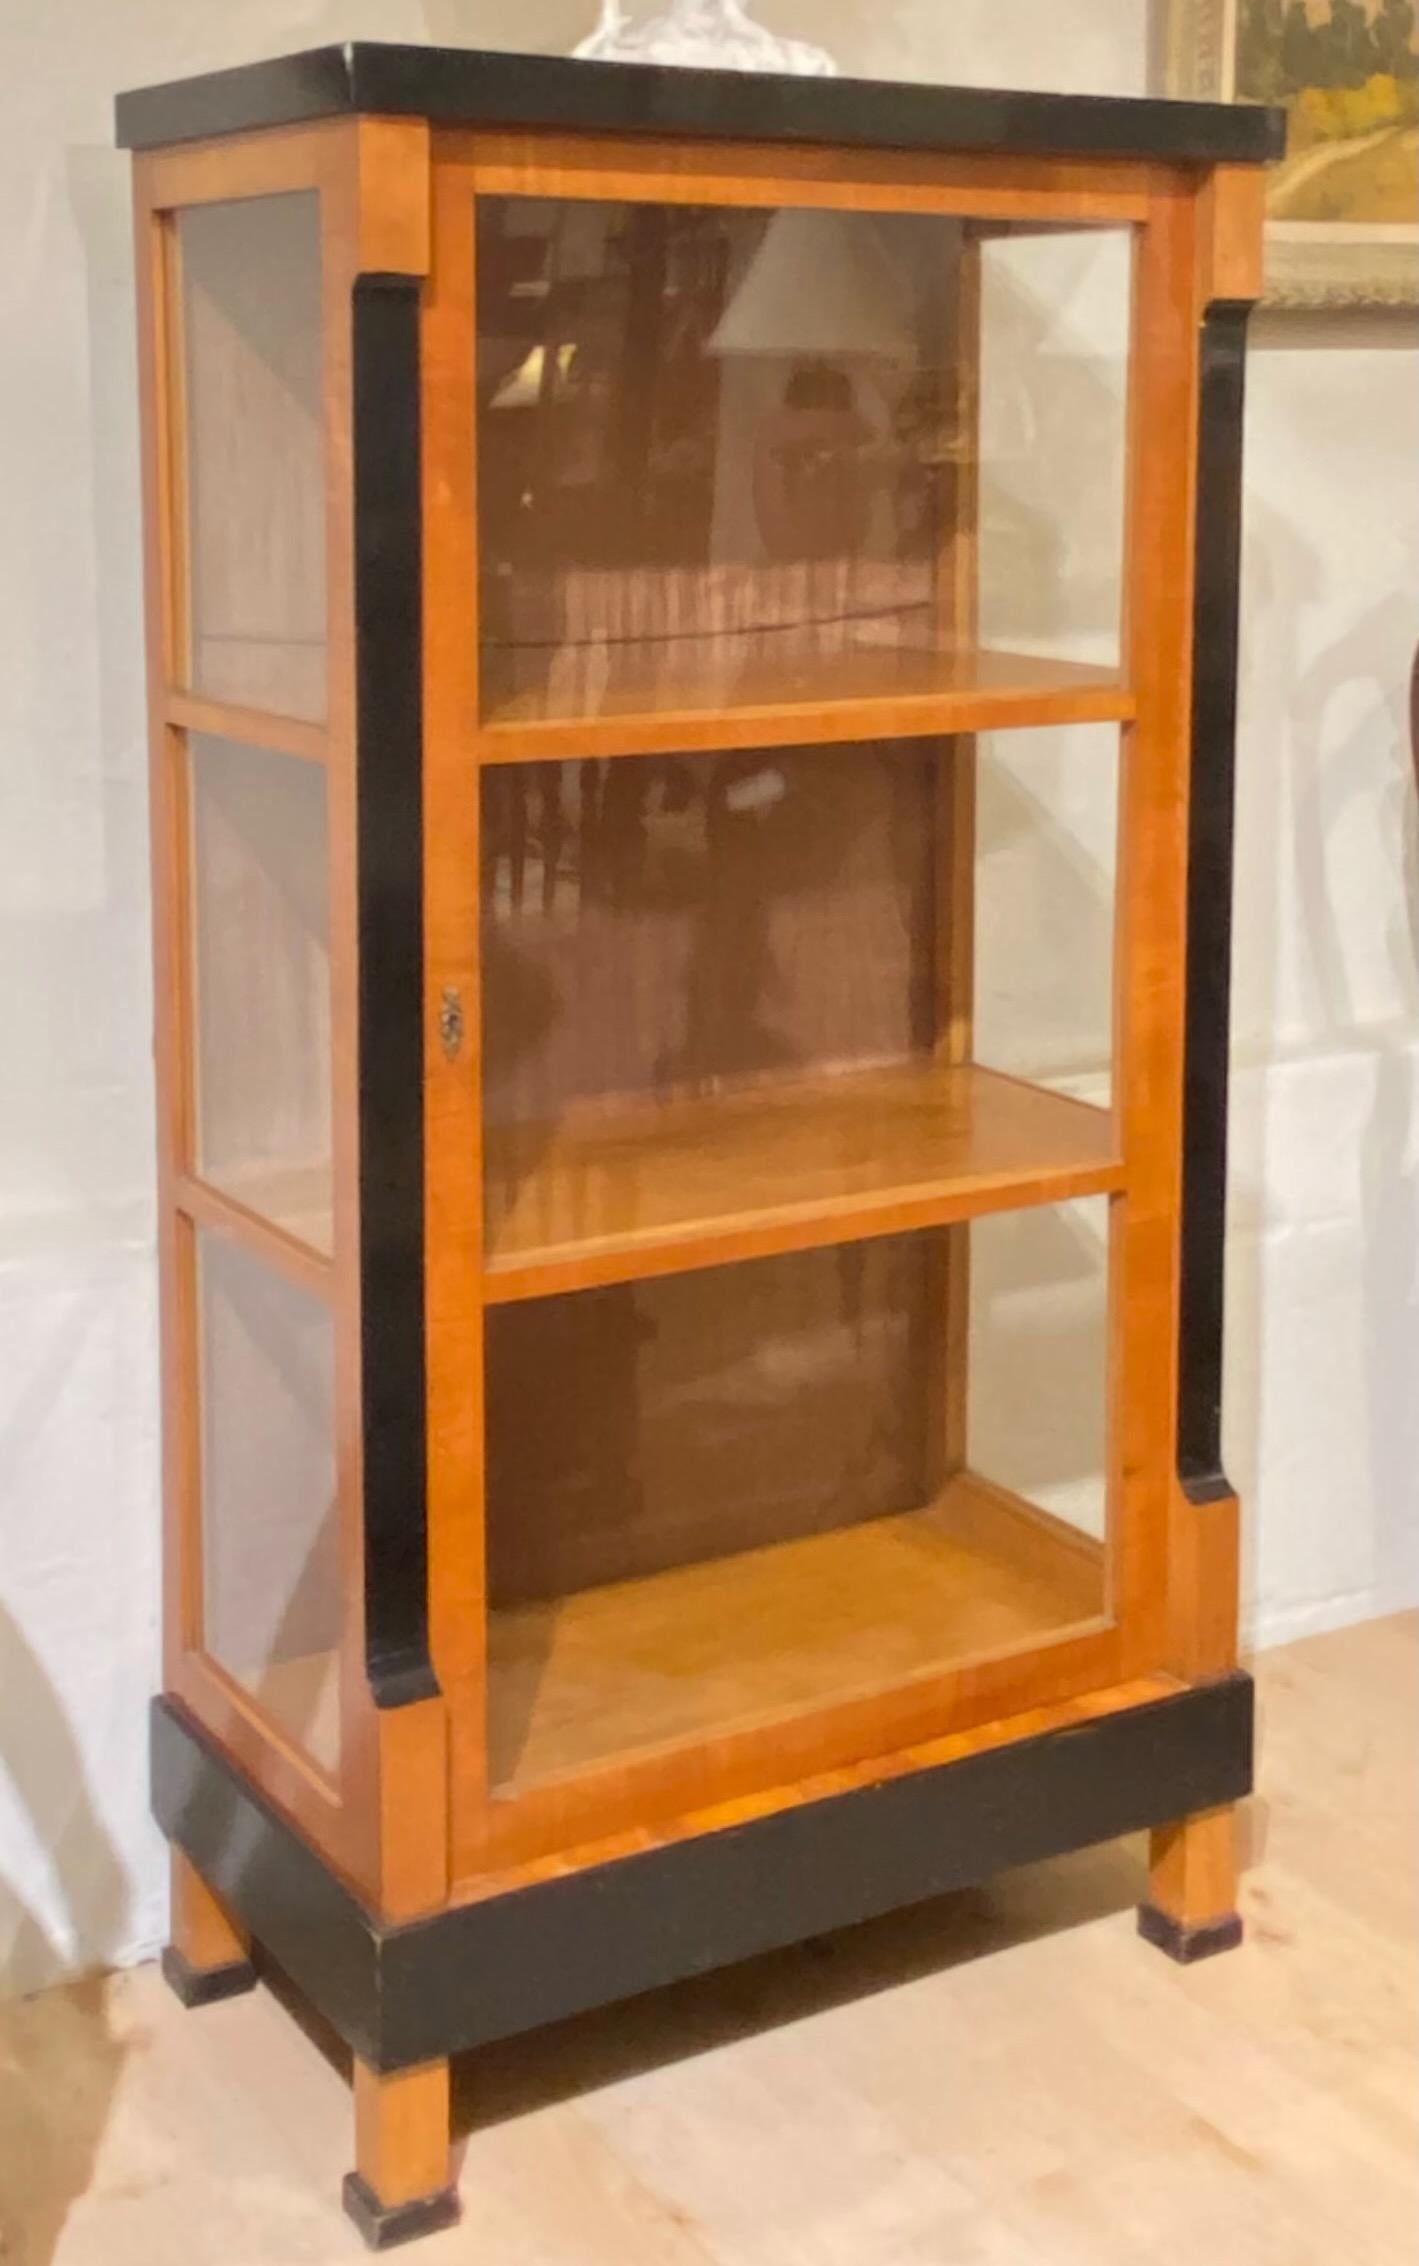 A cherrywood Biedermeier style vitrine or cabinet with ebonized detail.
Small easy to use size that would work in most rooms.
Glass front and sides with three shelves. The depth of each interior shelf is 13.75 inches.
Austrian, early 19th century,